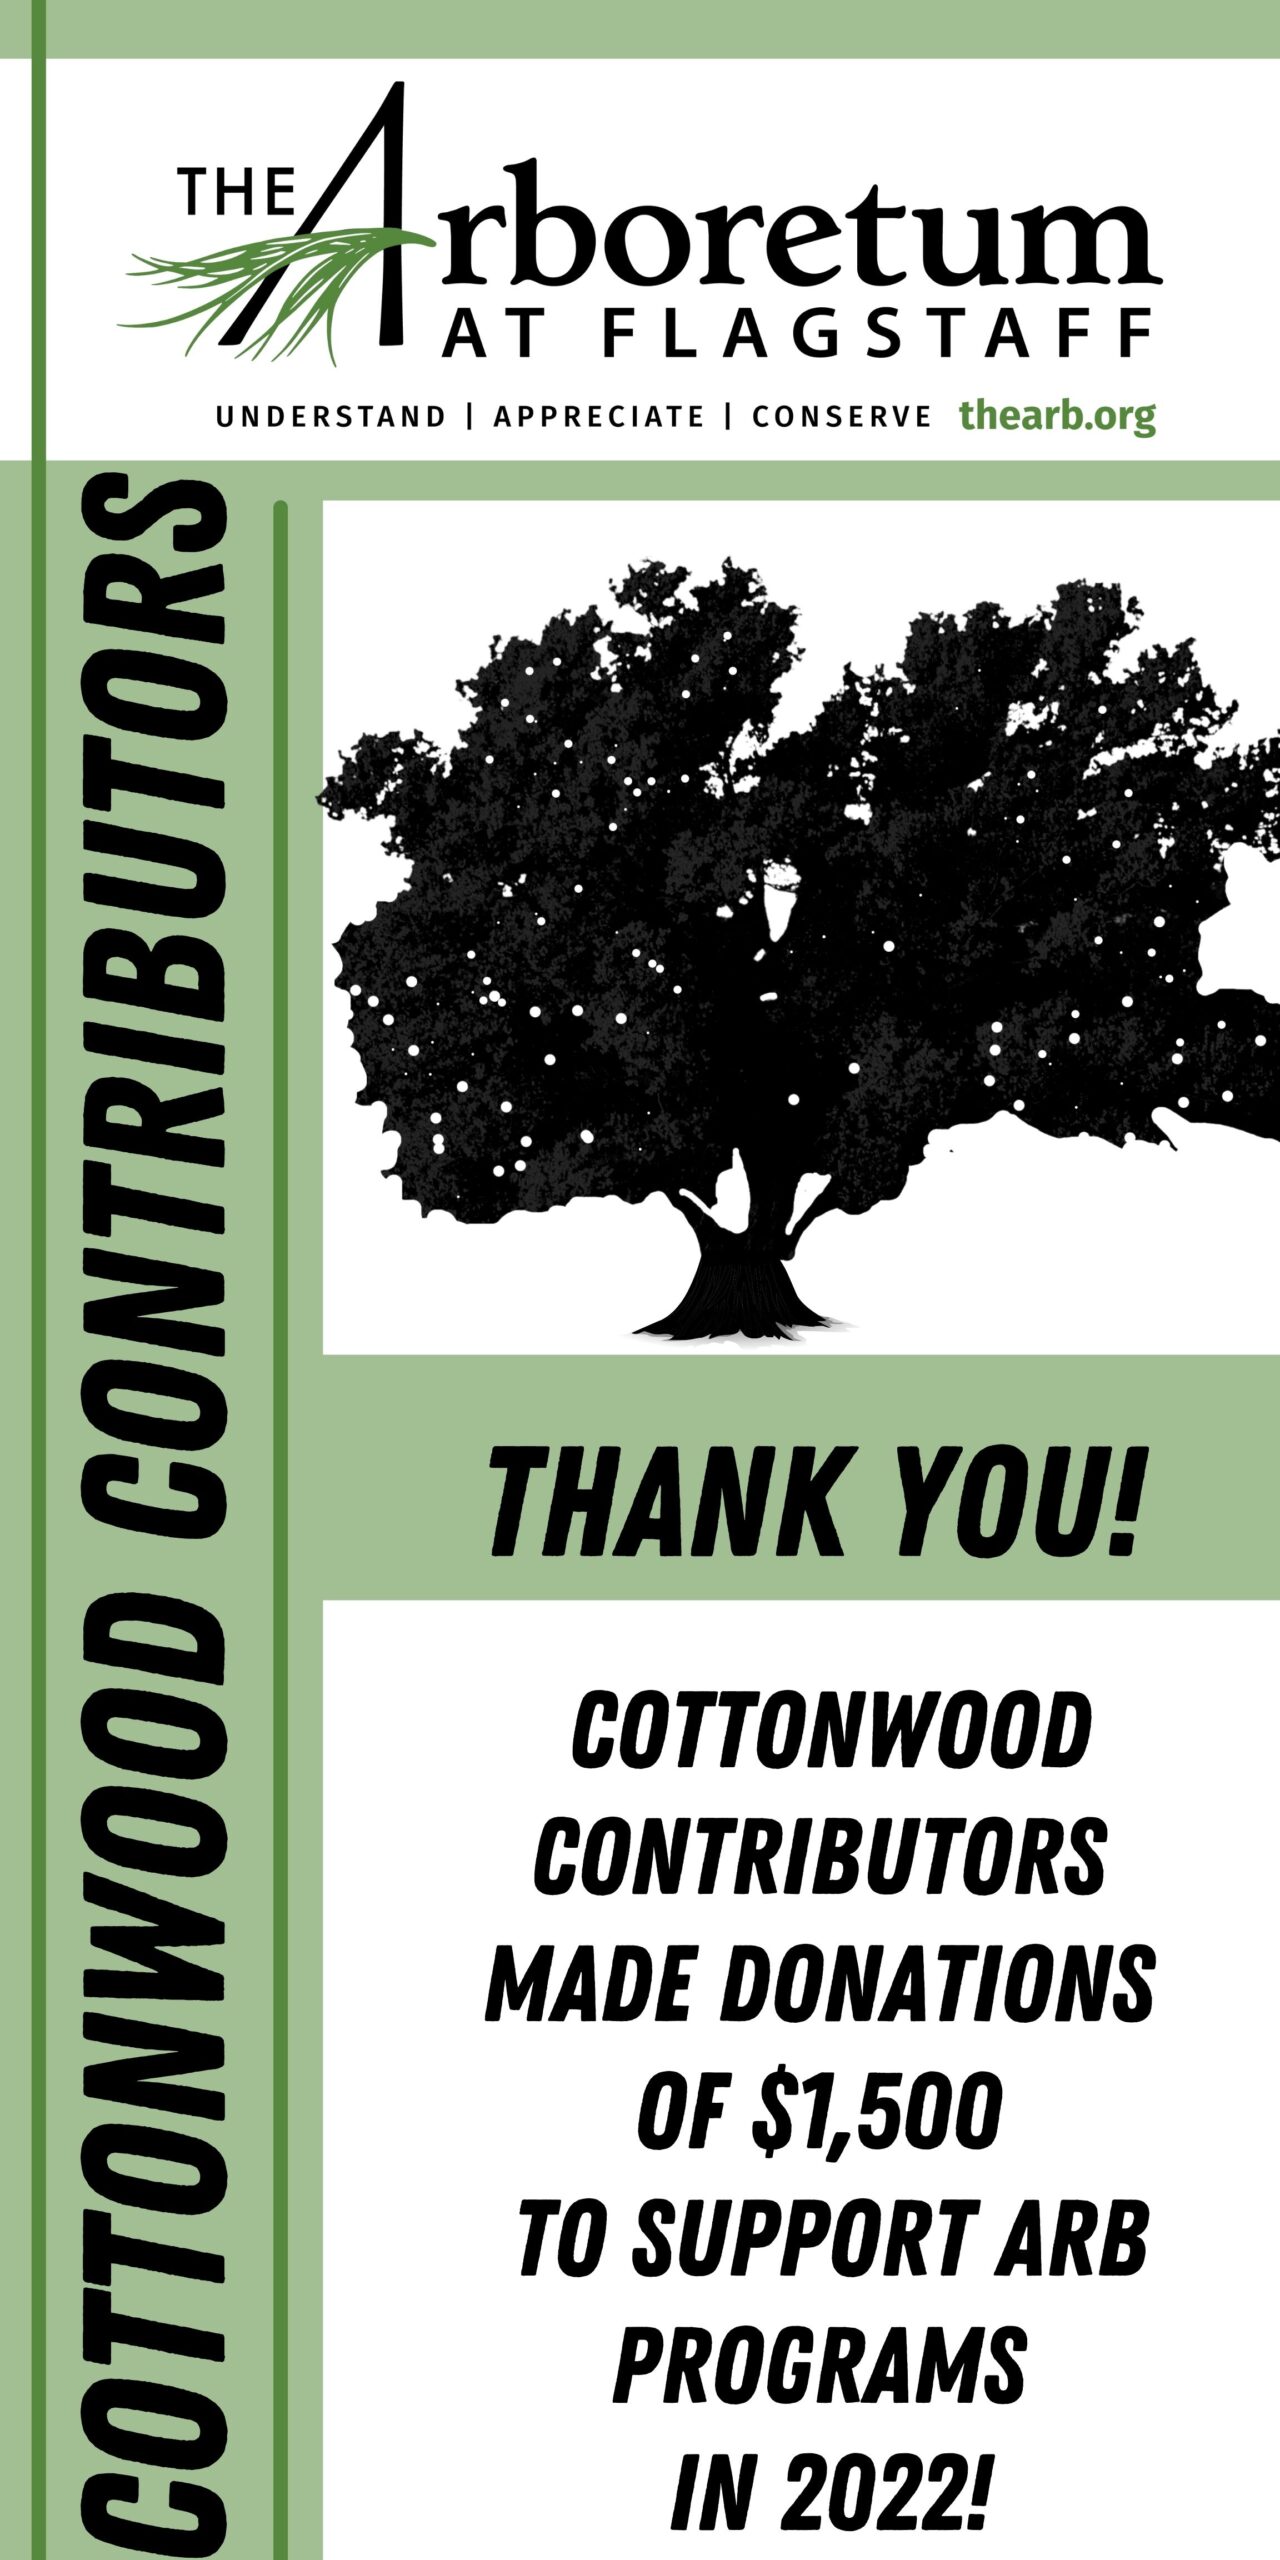 cottonwood contributors  made donations  of $1,500  to support Arb programs  in 2022!